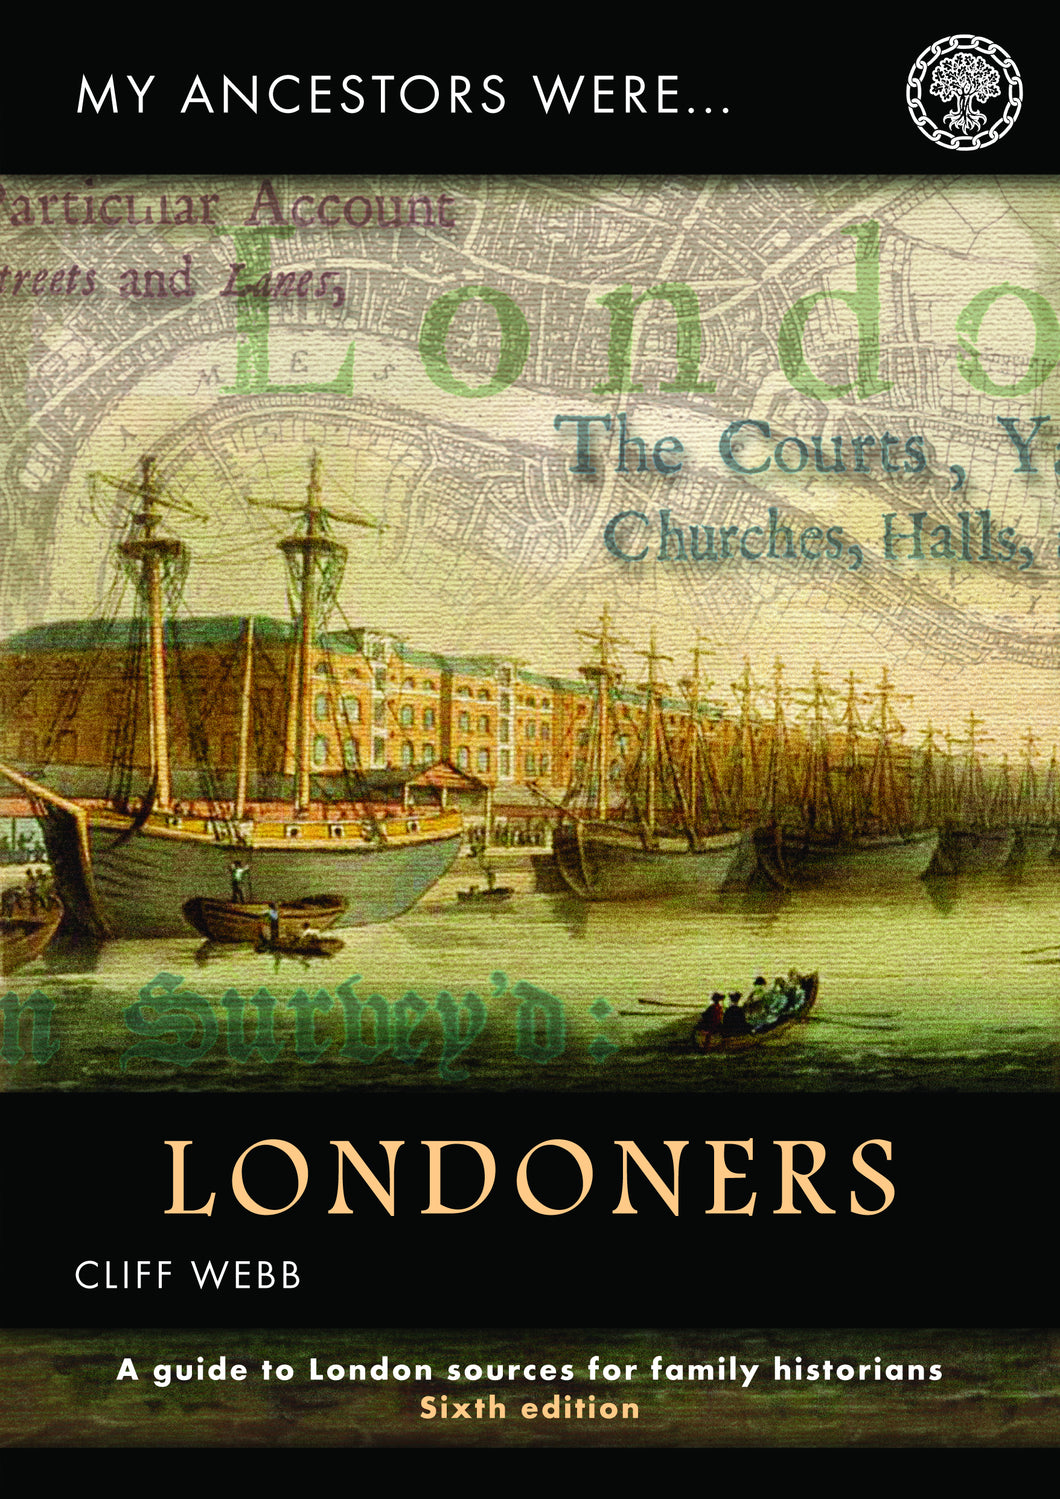 My Ancestors were Londoners: a guide to London sources for family historians